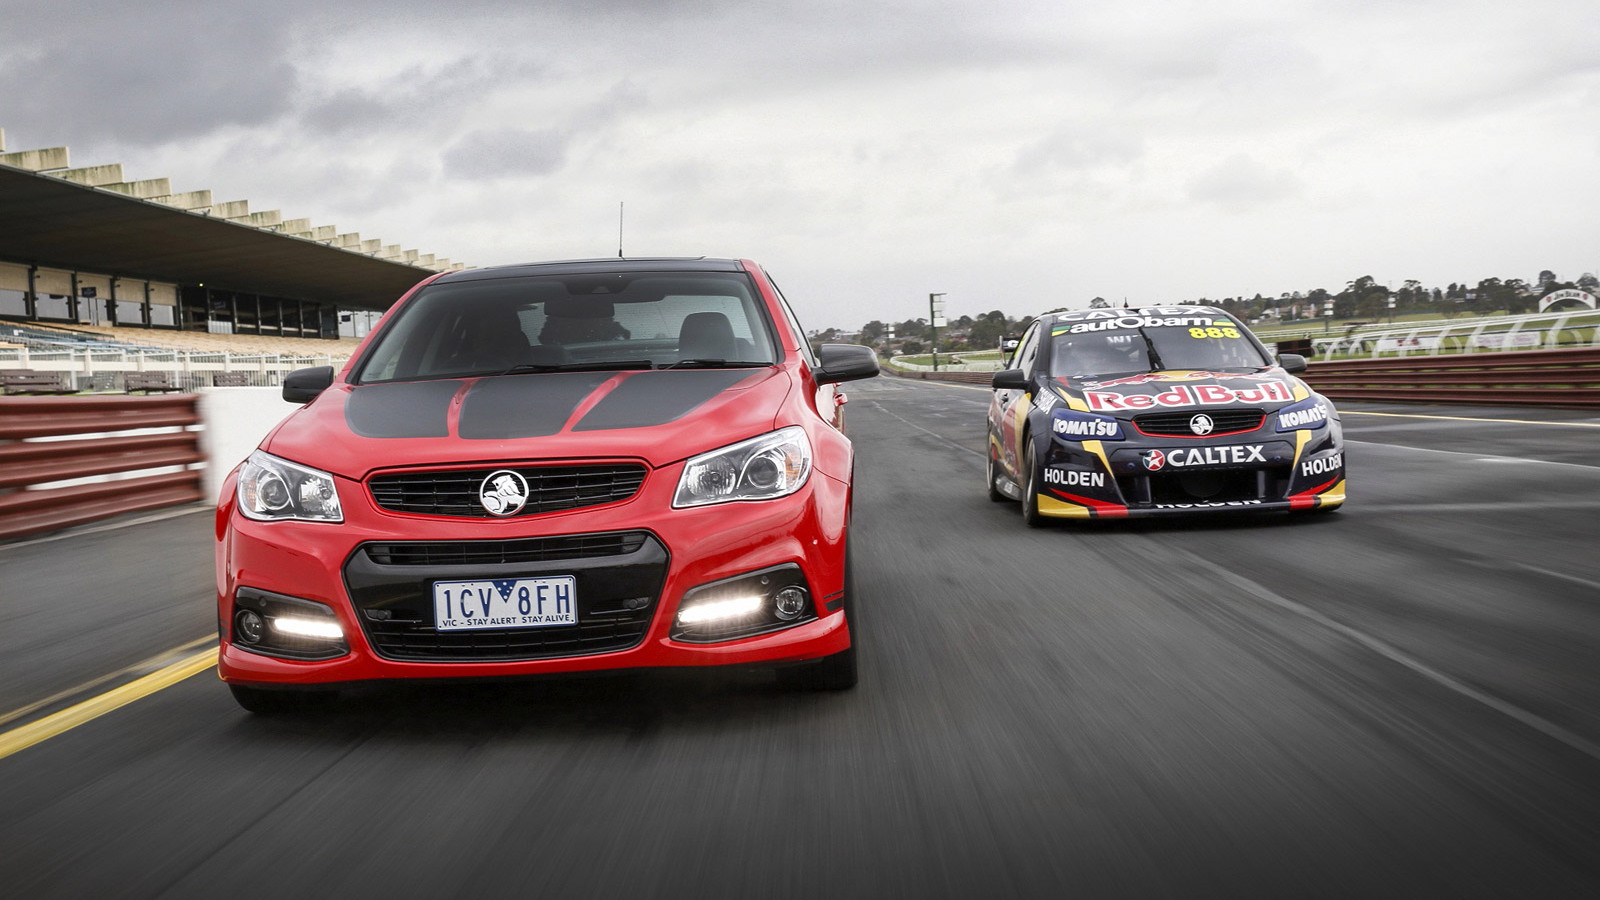 2015 Holden Commodore SSV Craig Lowndes Special Edition